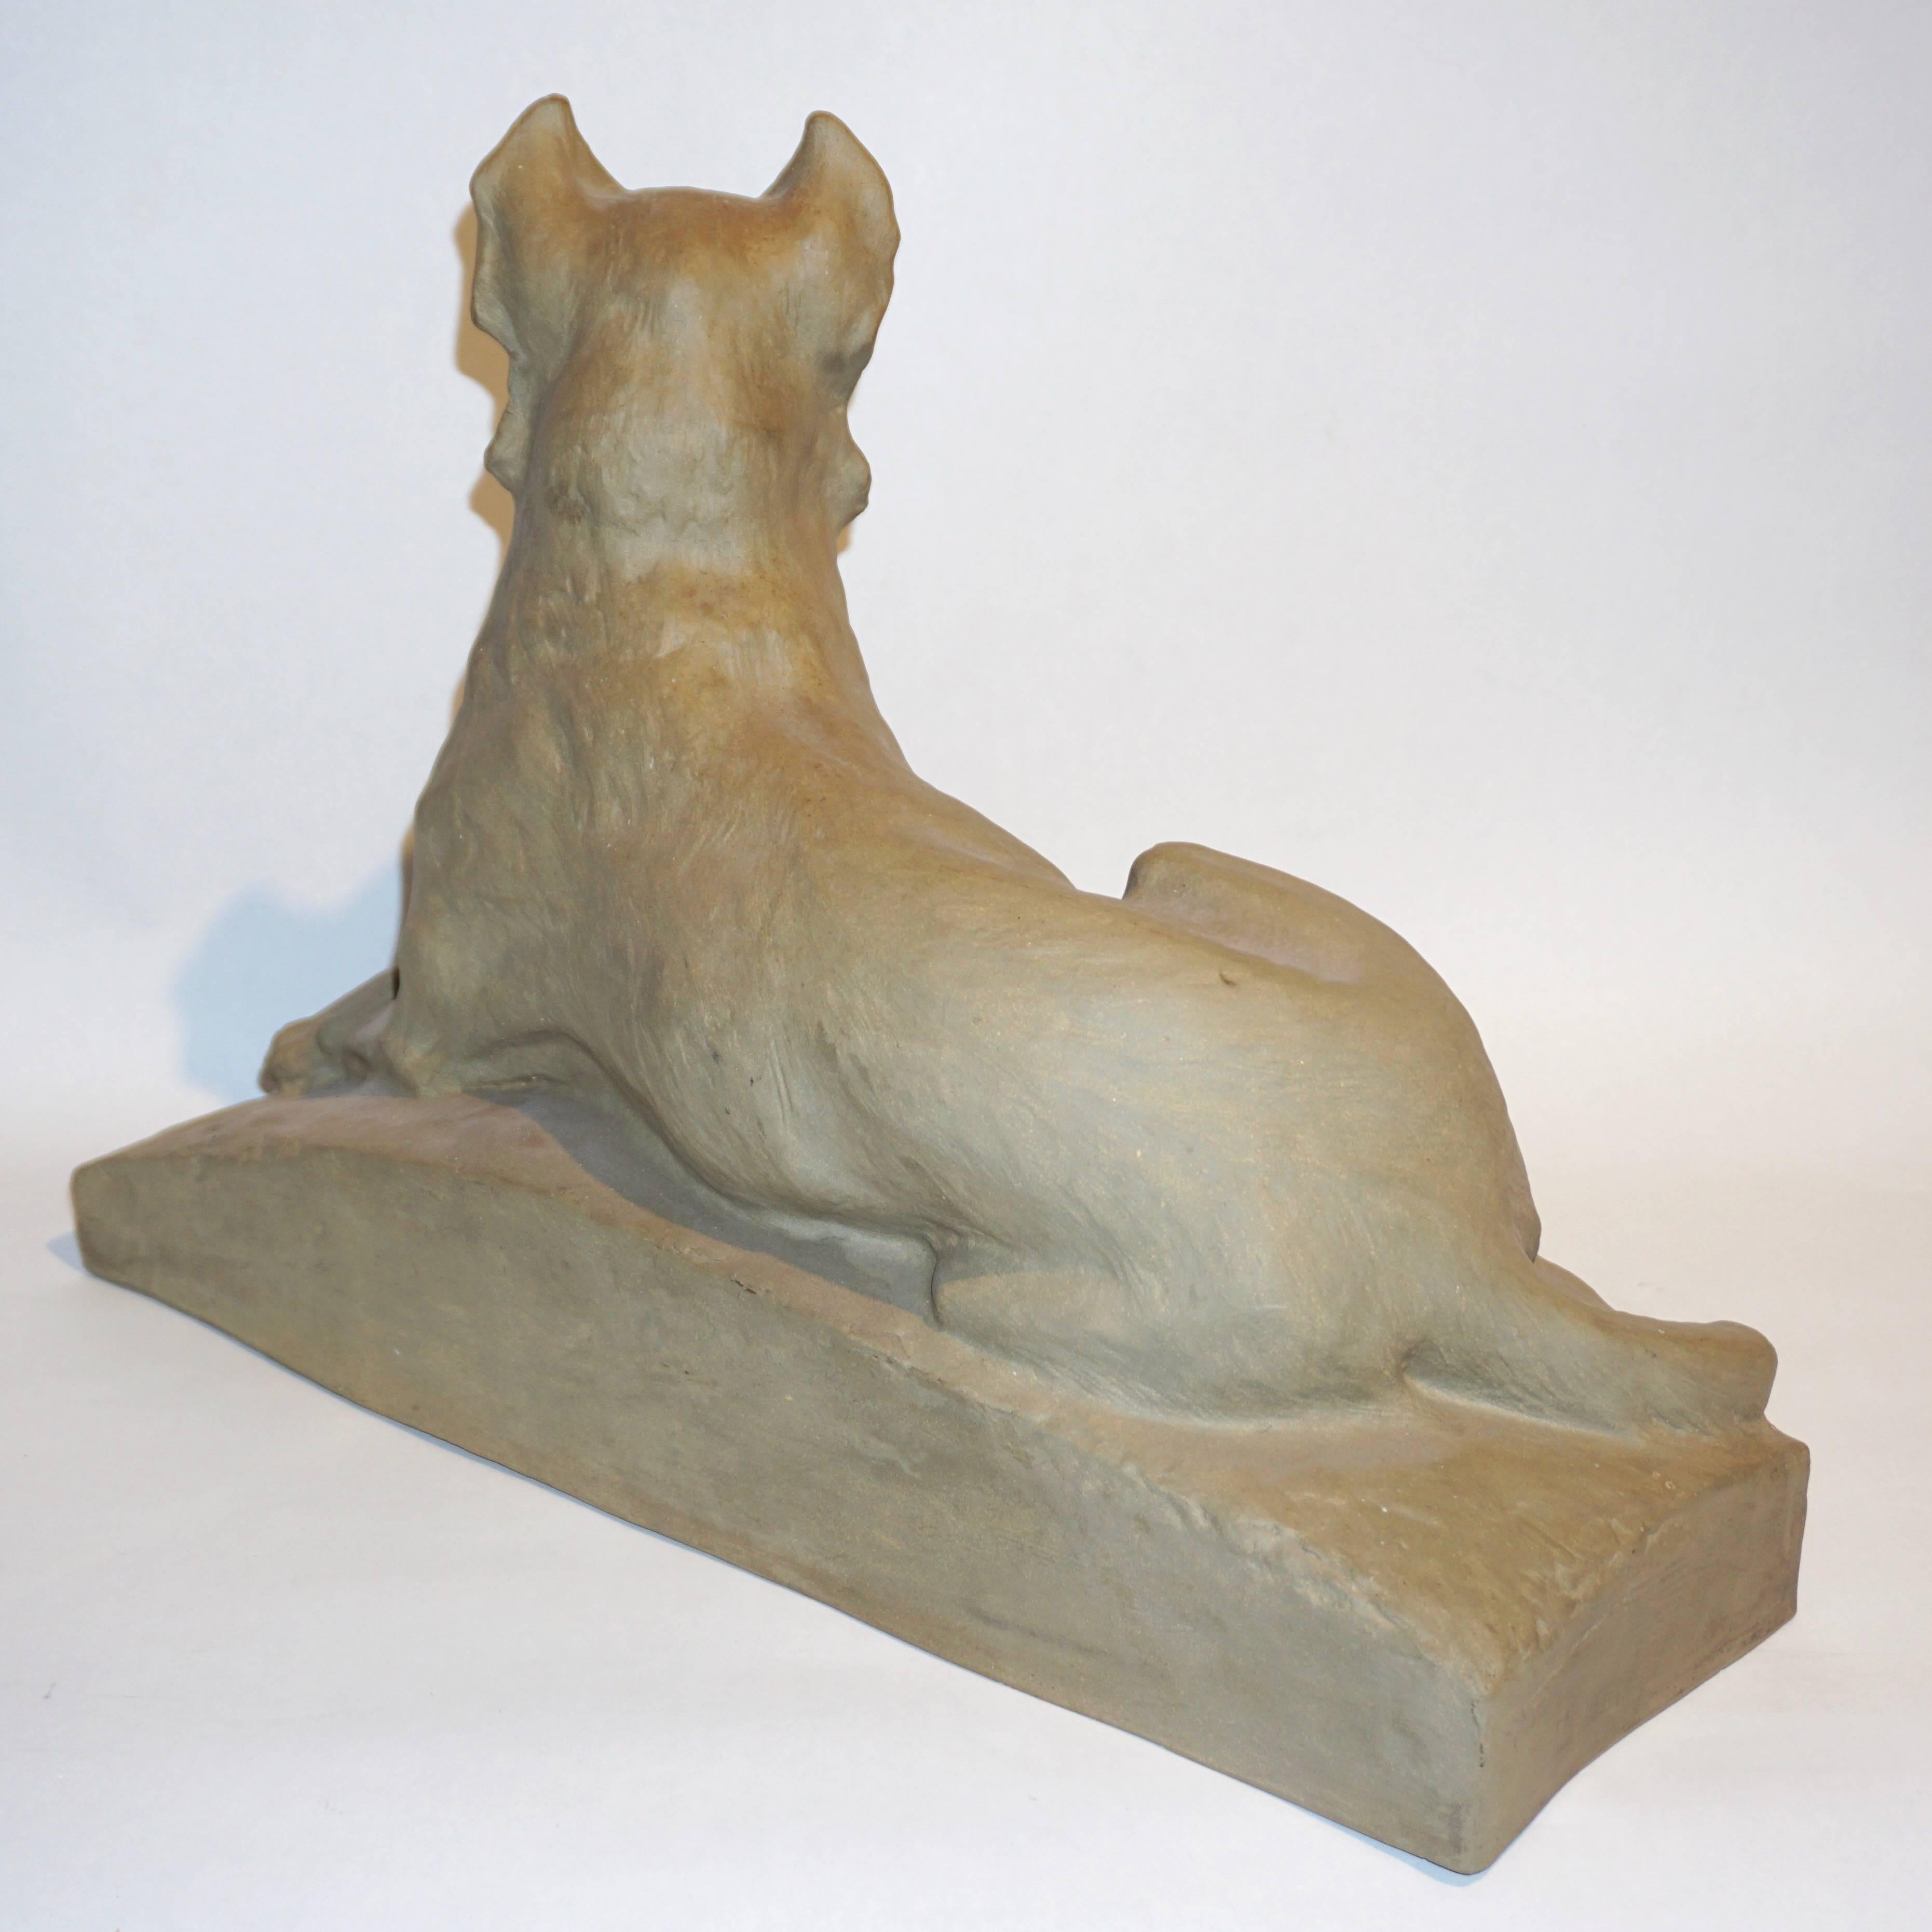 Hand-Carved Charles Virion 1920 Antique Gray Terracotta Sculpture of a German Shepherd Dog